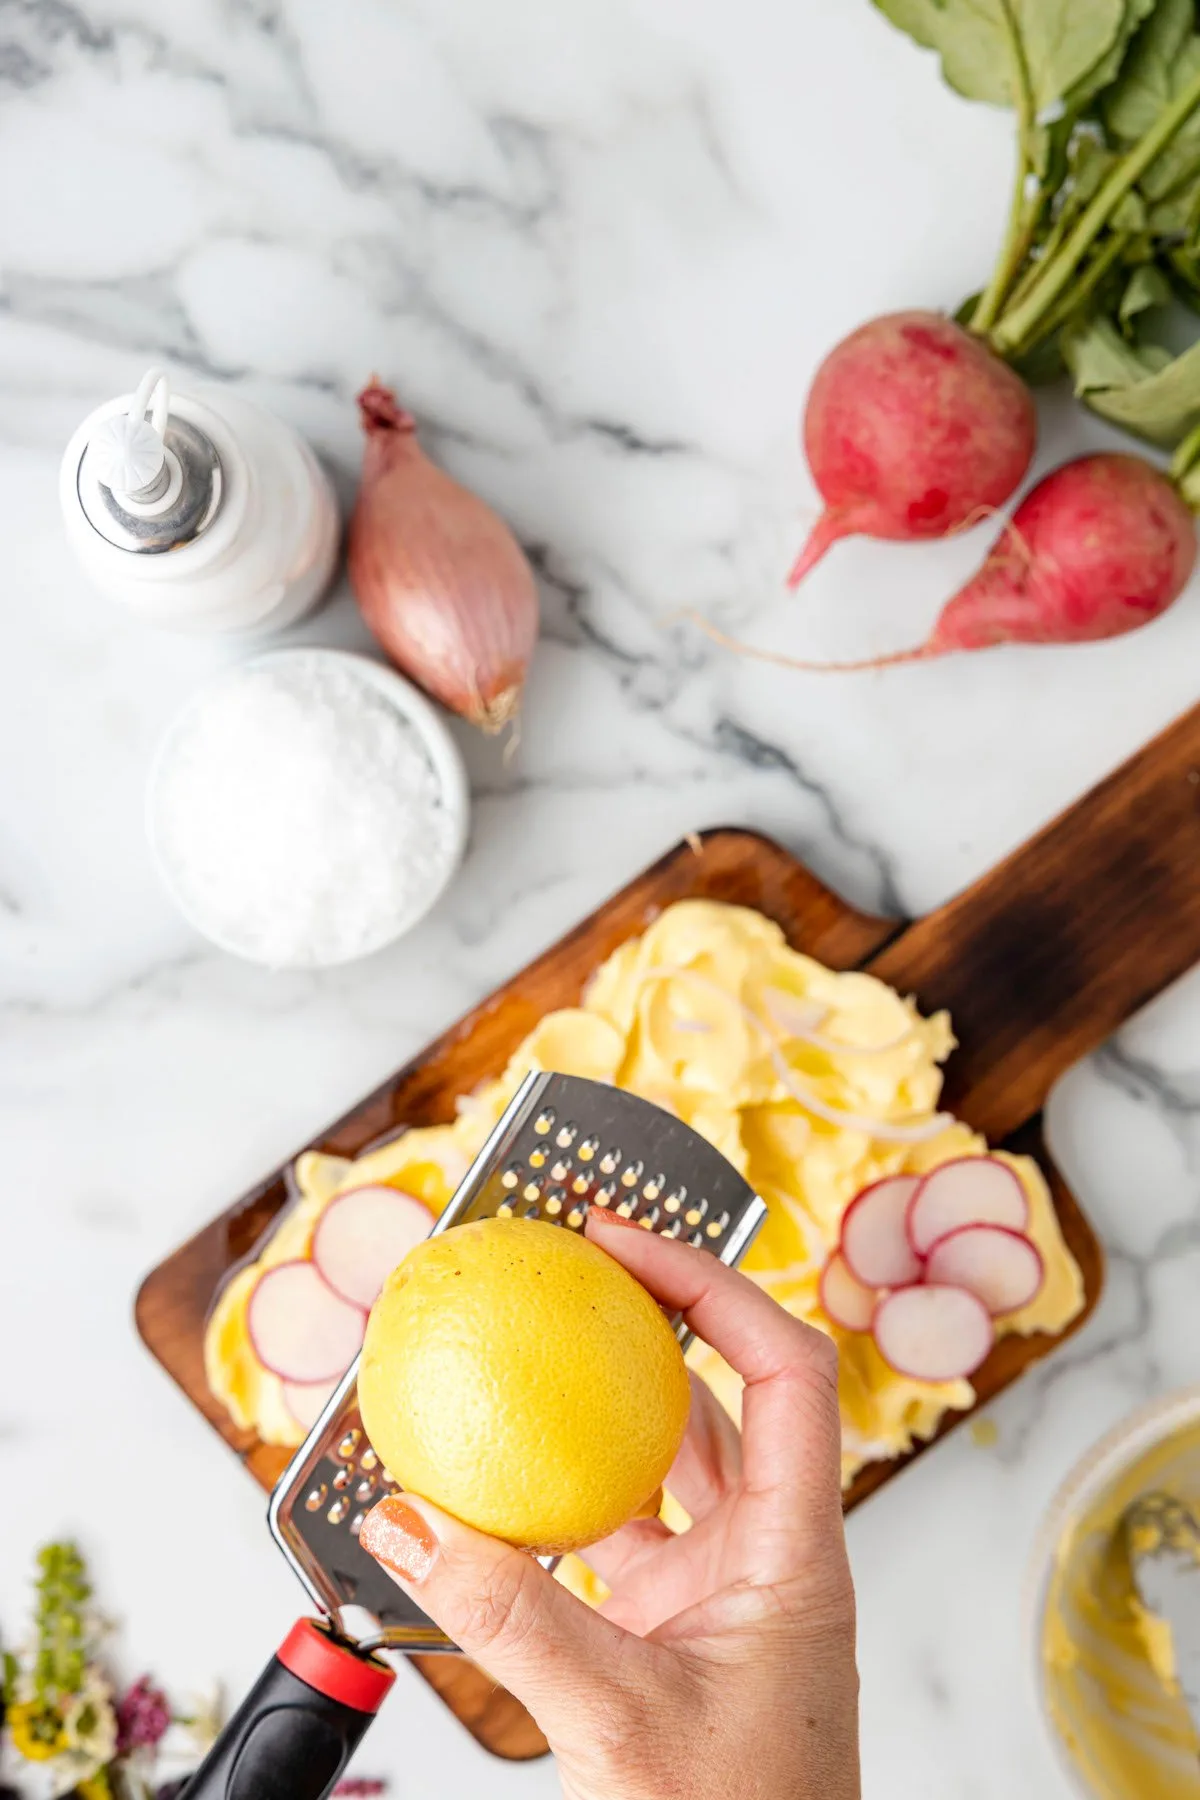 zesting a lemon with a grater over a butter board